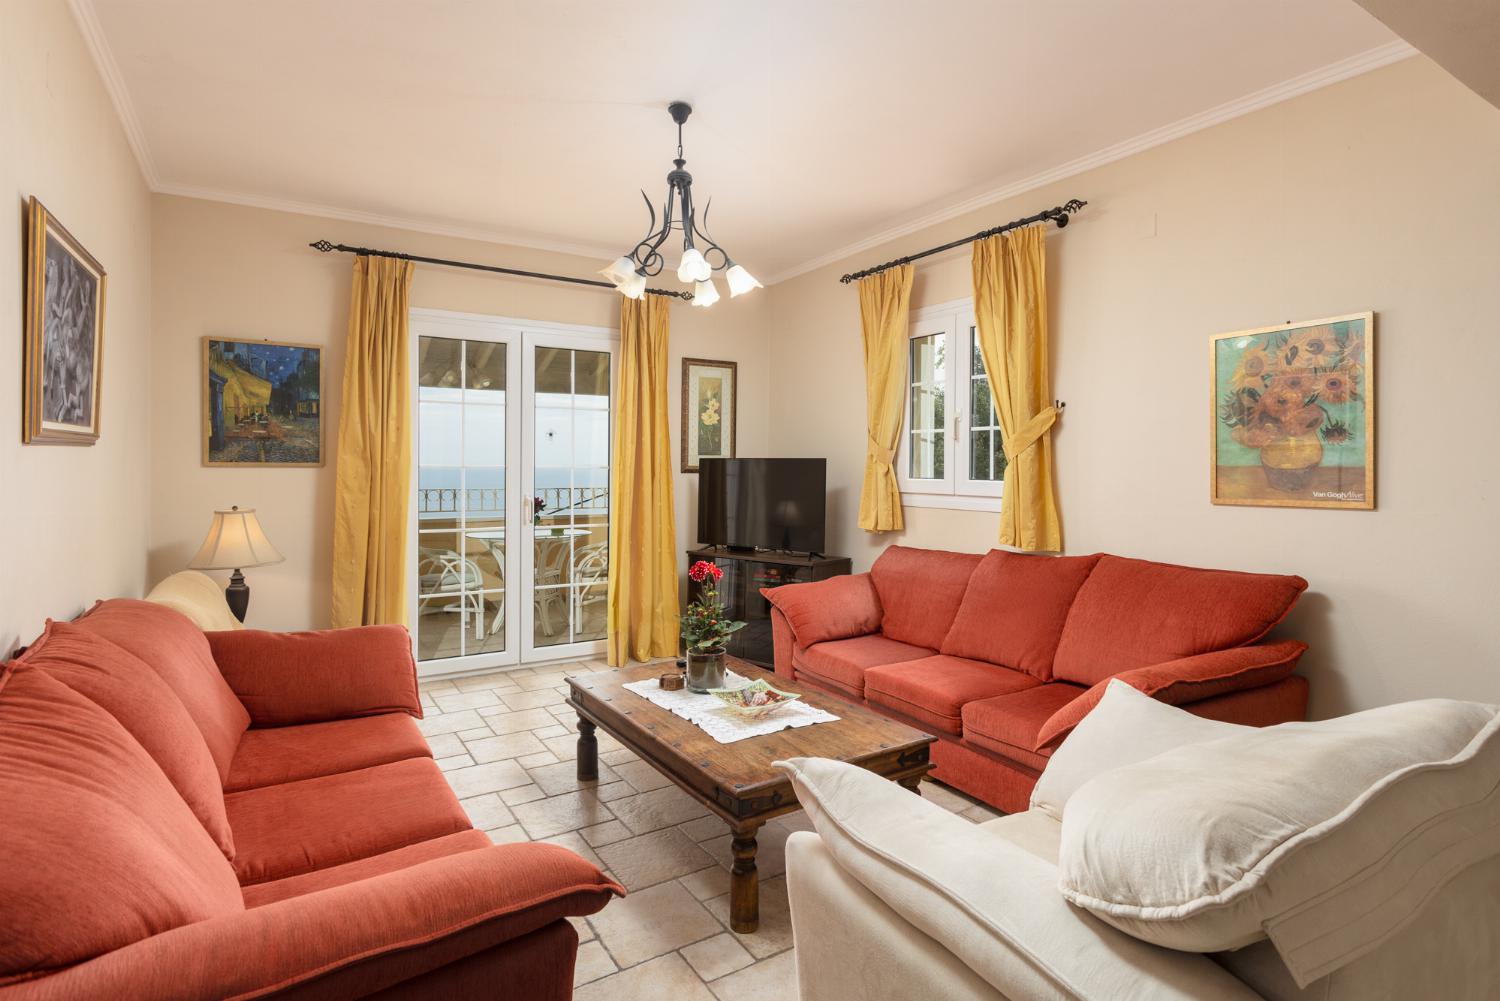 Living room on first floor with sofas, WiFi internet, satellite TV, and balcony access